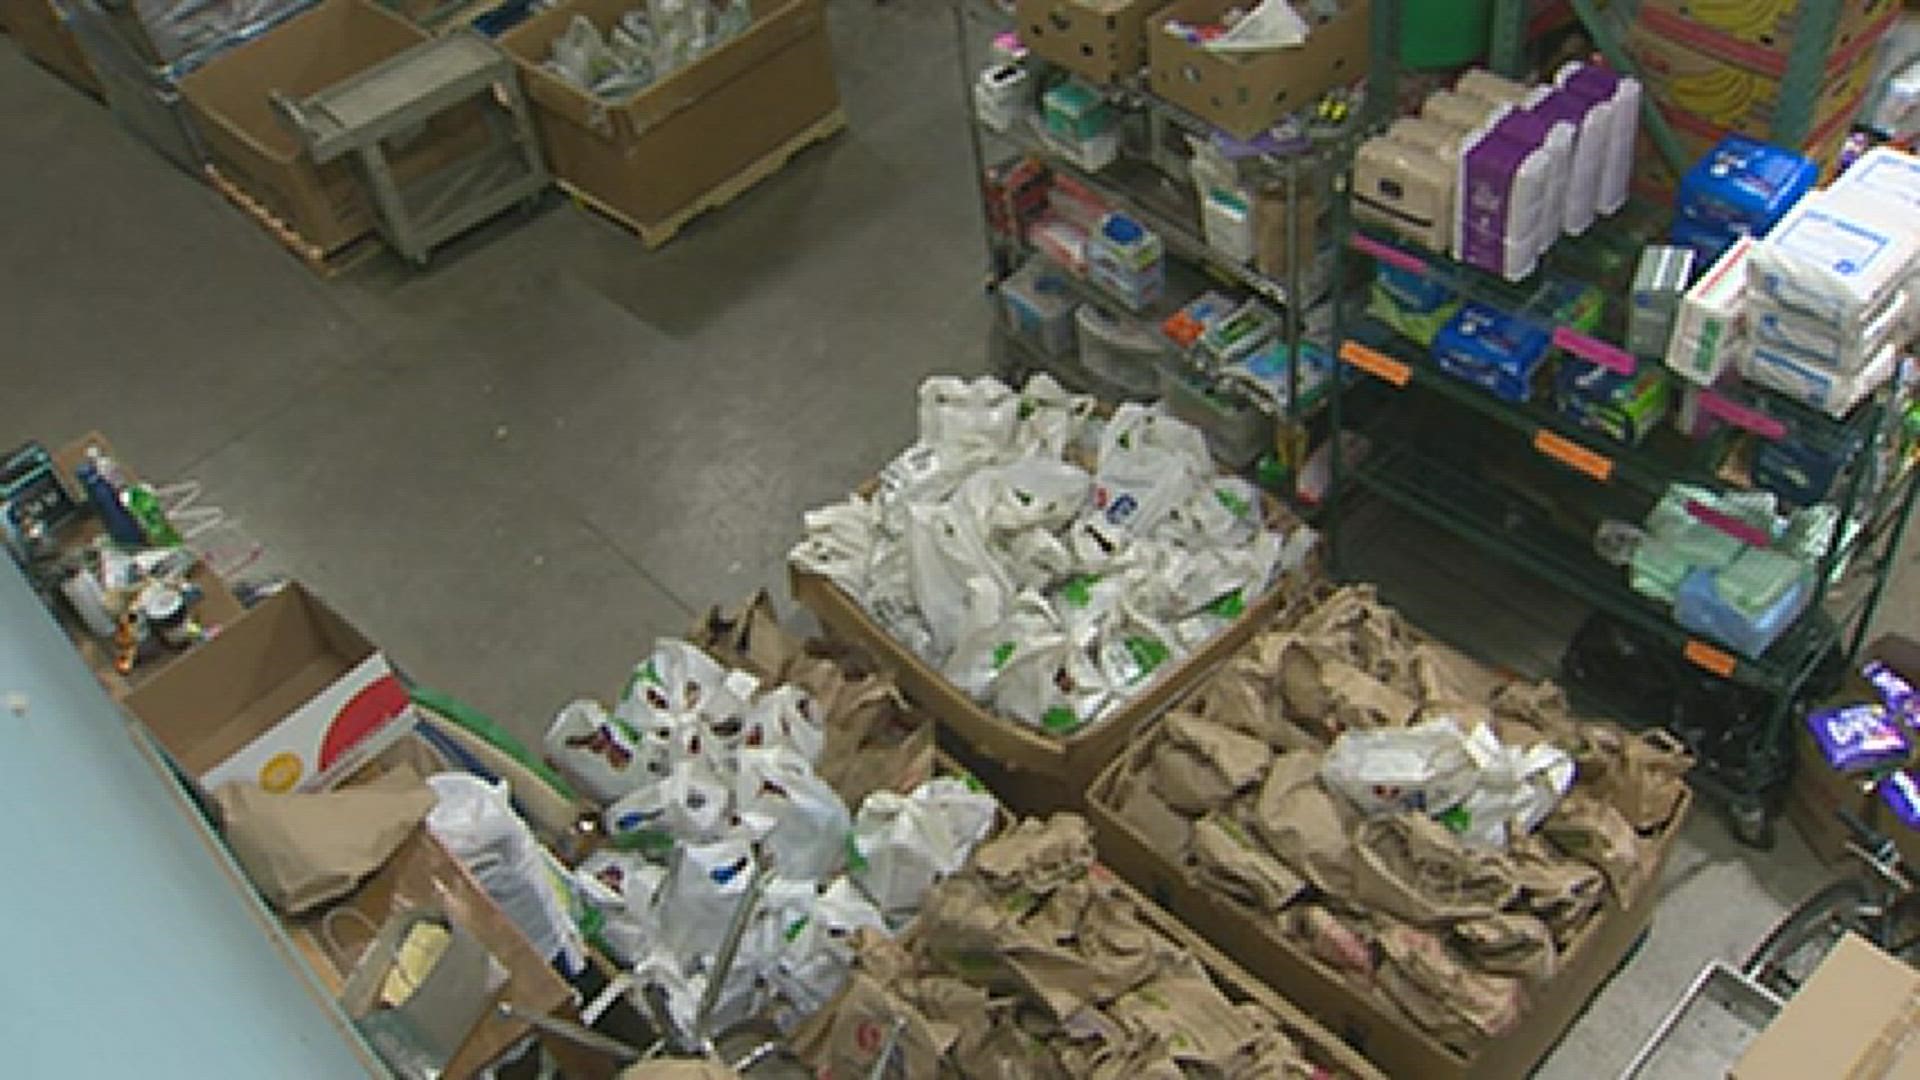 SnowCap provides food and clothing to thousands of people in Gresham and East Portland. The stolen trucks were recovered Monday, but their tools are still missing.